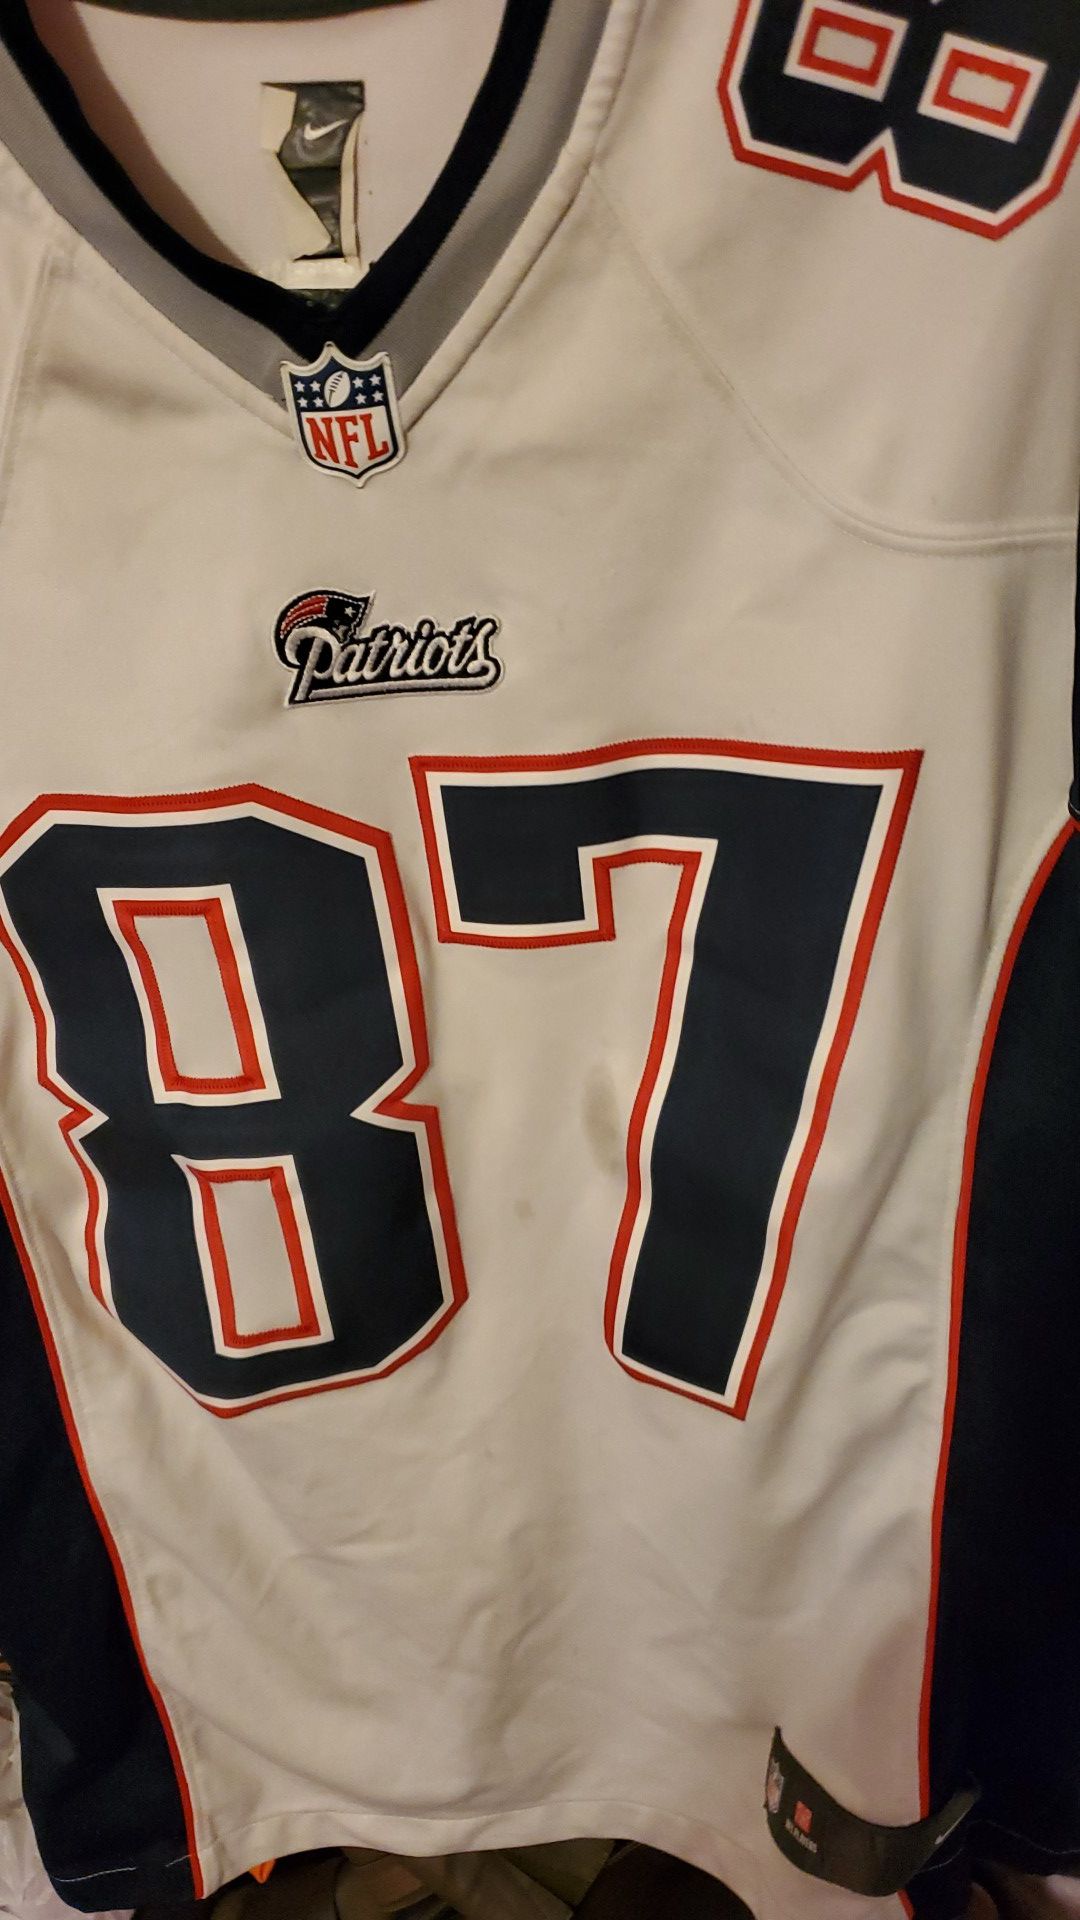 New England PATRIOTS ROB GRONKOWSKI size Large nike jersey for $30